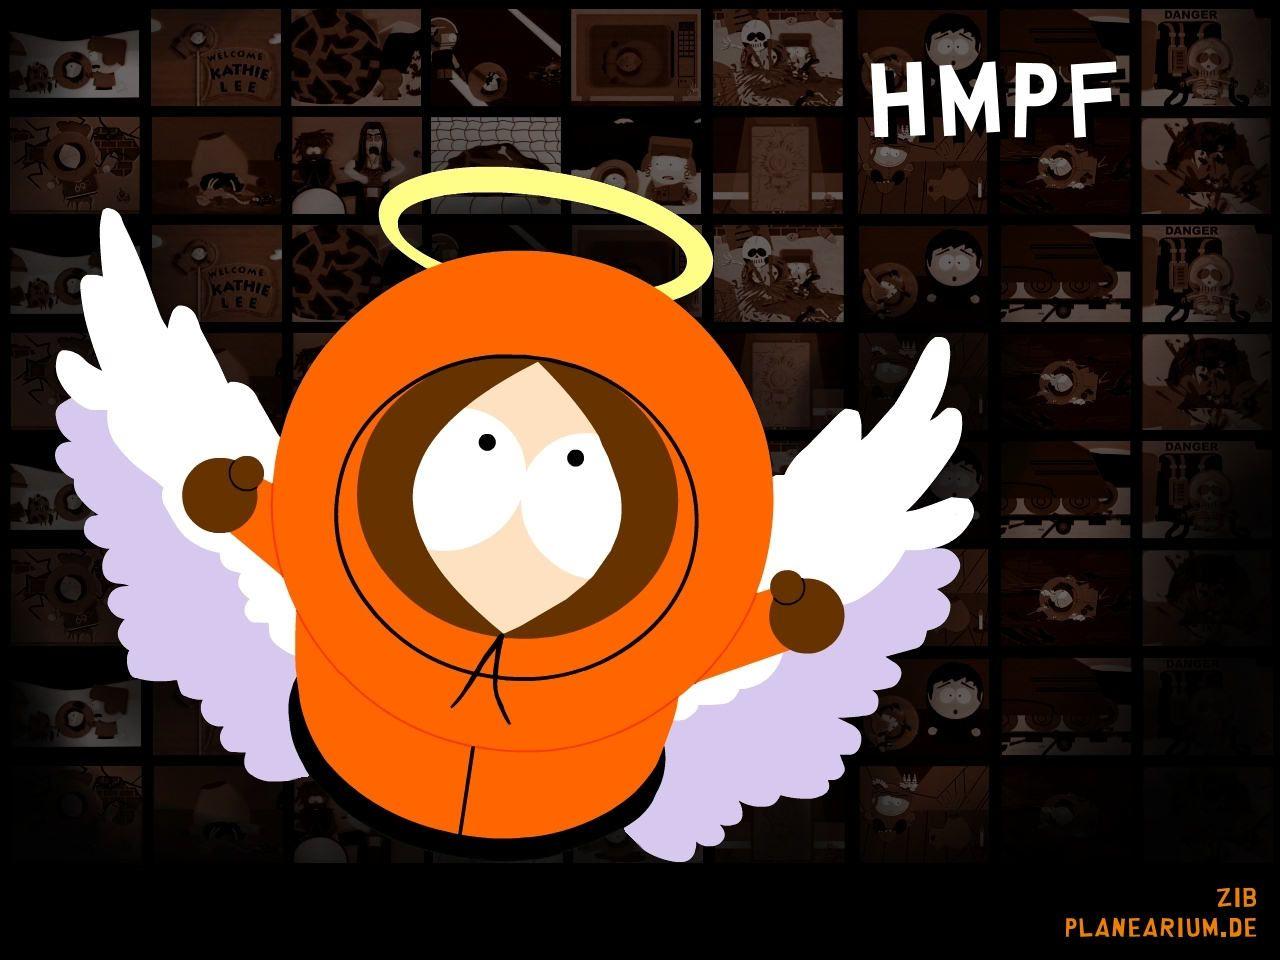 South Park Wallpapers Kenny - Wallpaper Cave